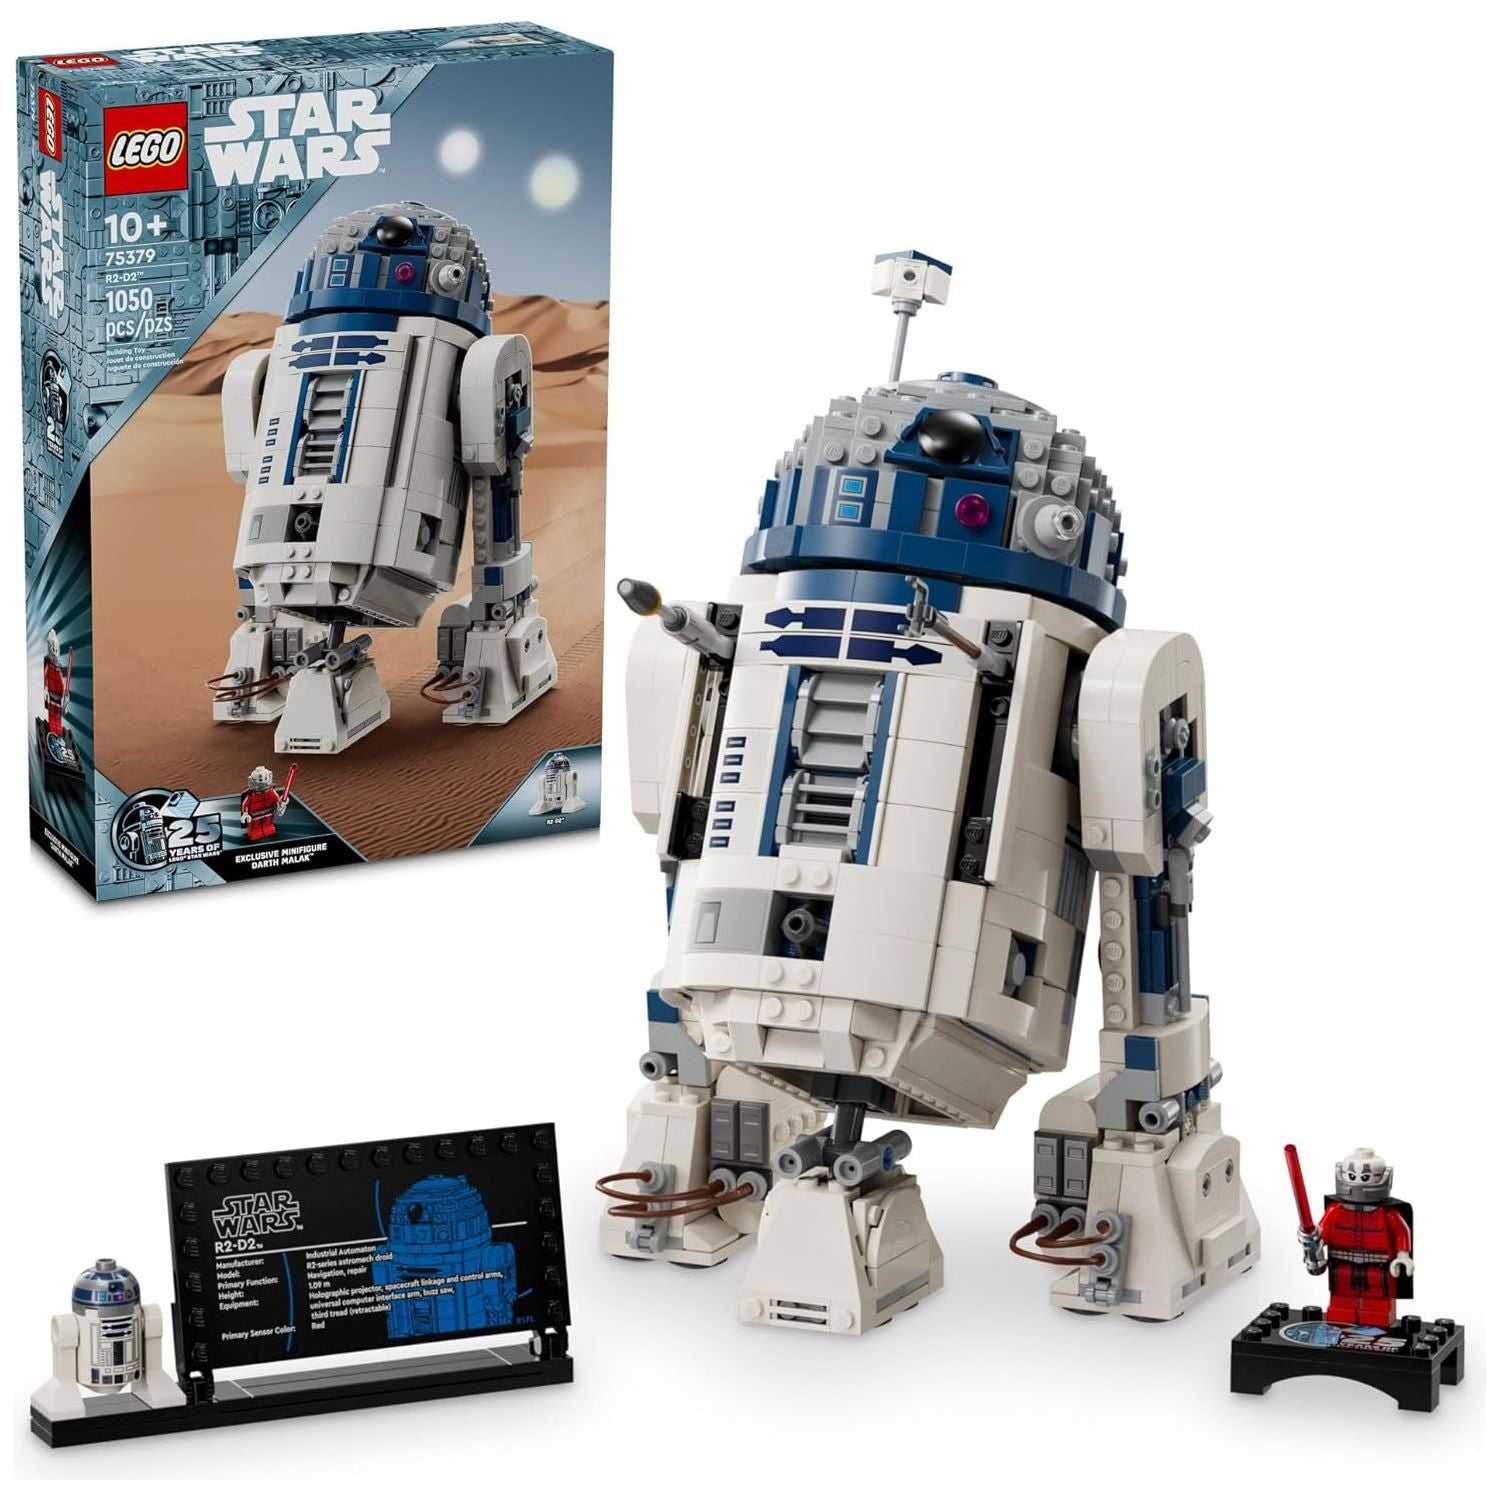 LEGO 75379 Star Wars R2-D2 Brick Built Droid Figure, Collectible Star Wars Room Décor with Exclusive 25th Anniversary Minifigure Darth Malak, Creative Play Gift.